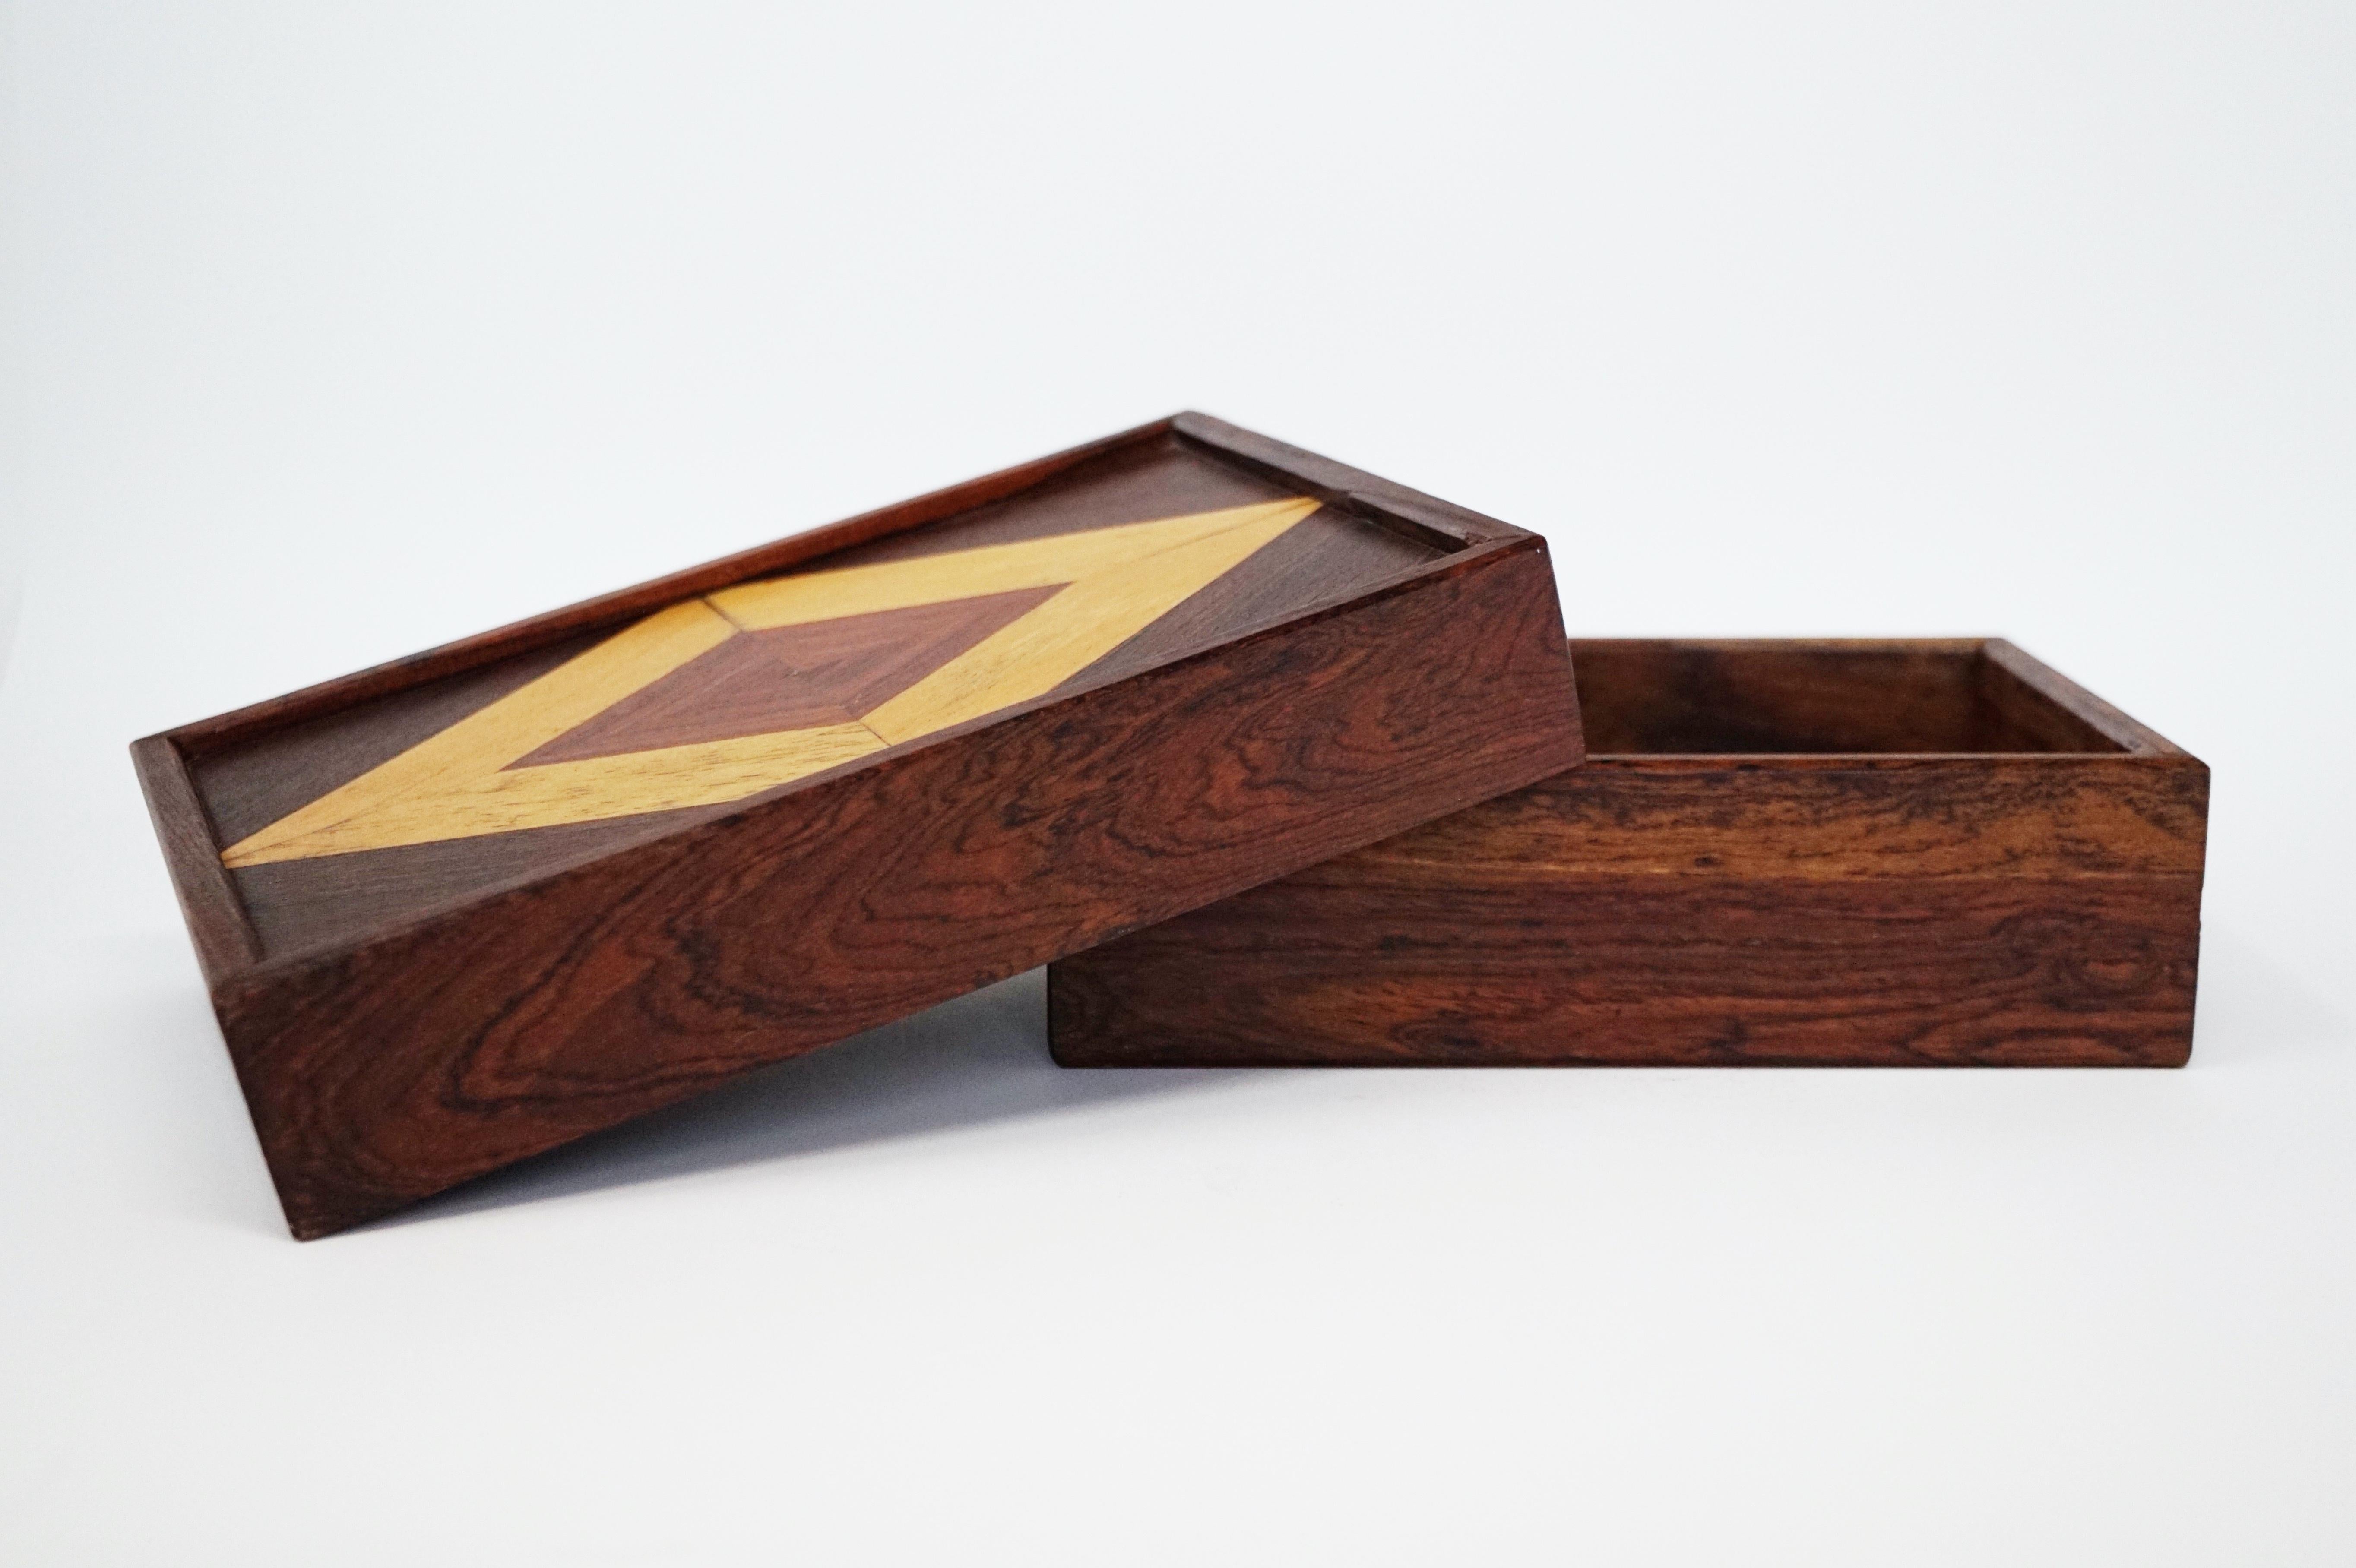 This incredible Cocobolo Rosewood lidded catchall box by leading 1960s modernist designer Don Shoemaker for Senal S.A. (Mexico) is highly sought after by interior designers and avid collectors alike. This example is particularly perfect for the